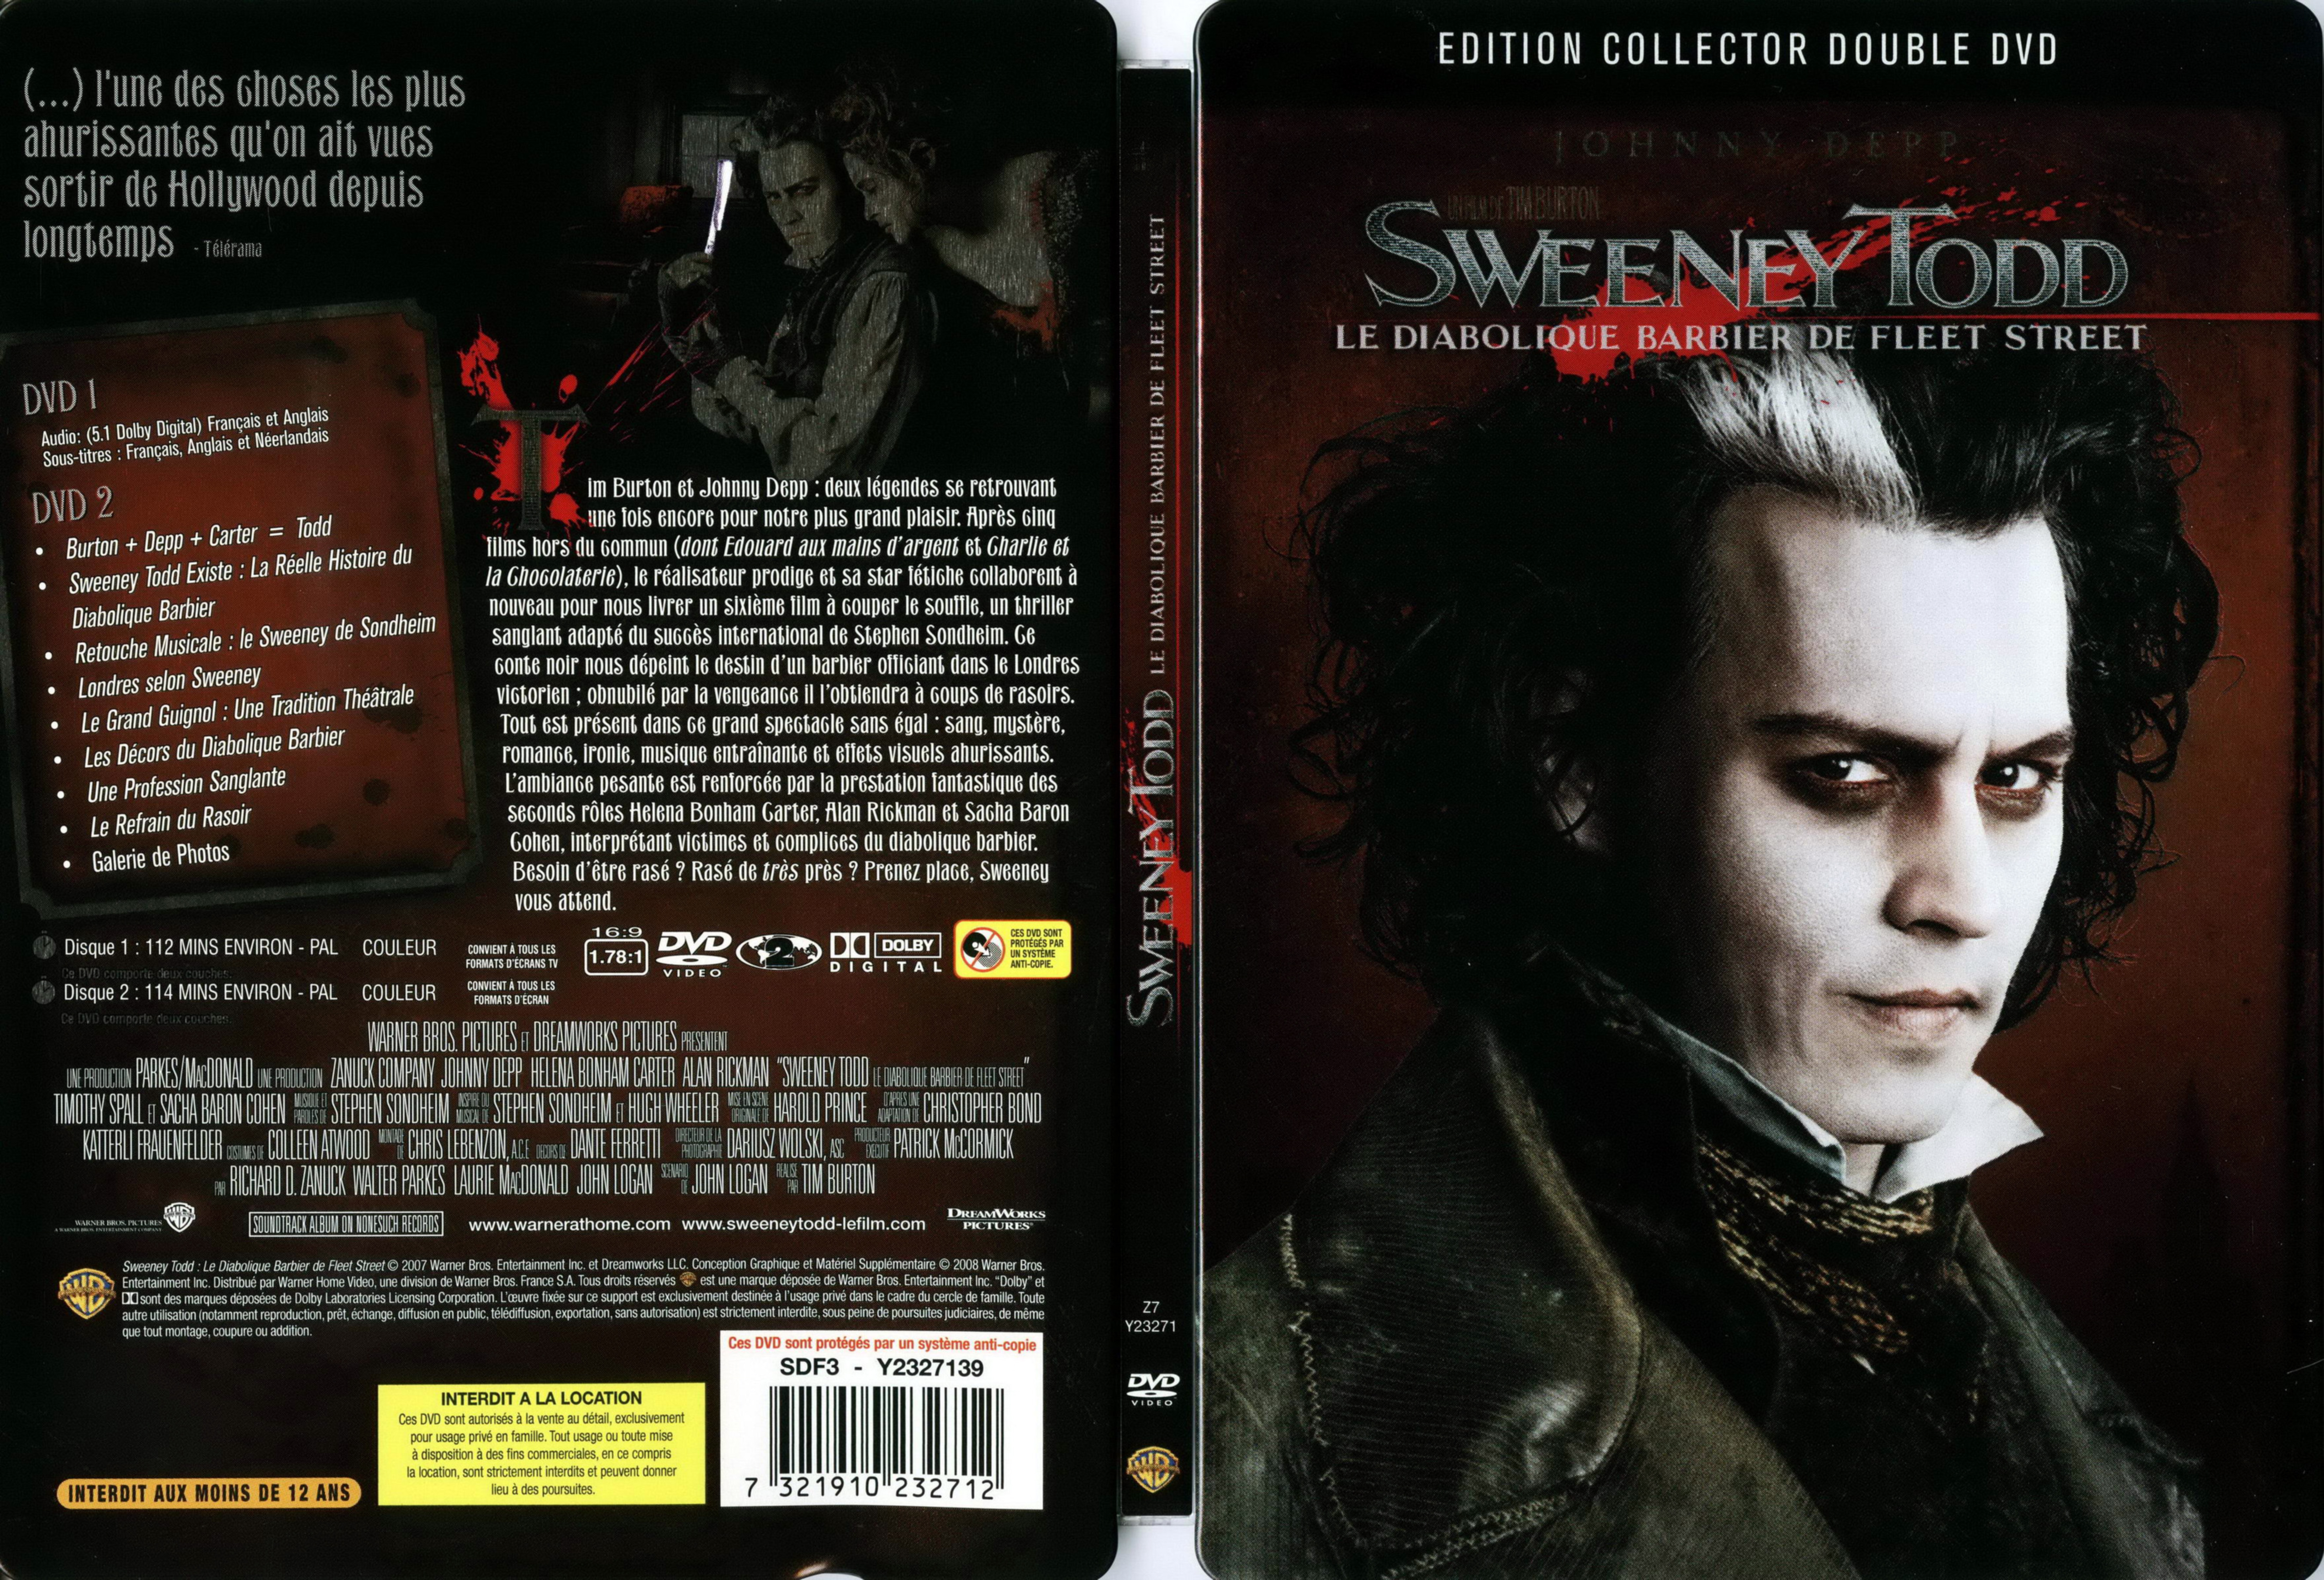 Jaquette DVD Sweeney Todd v2